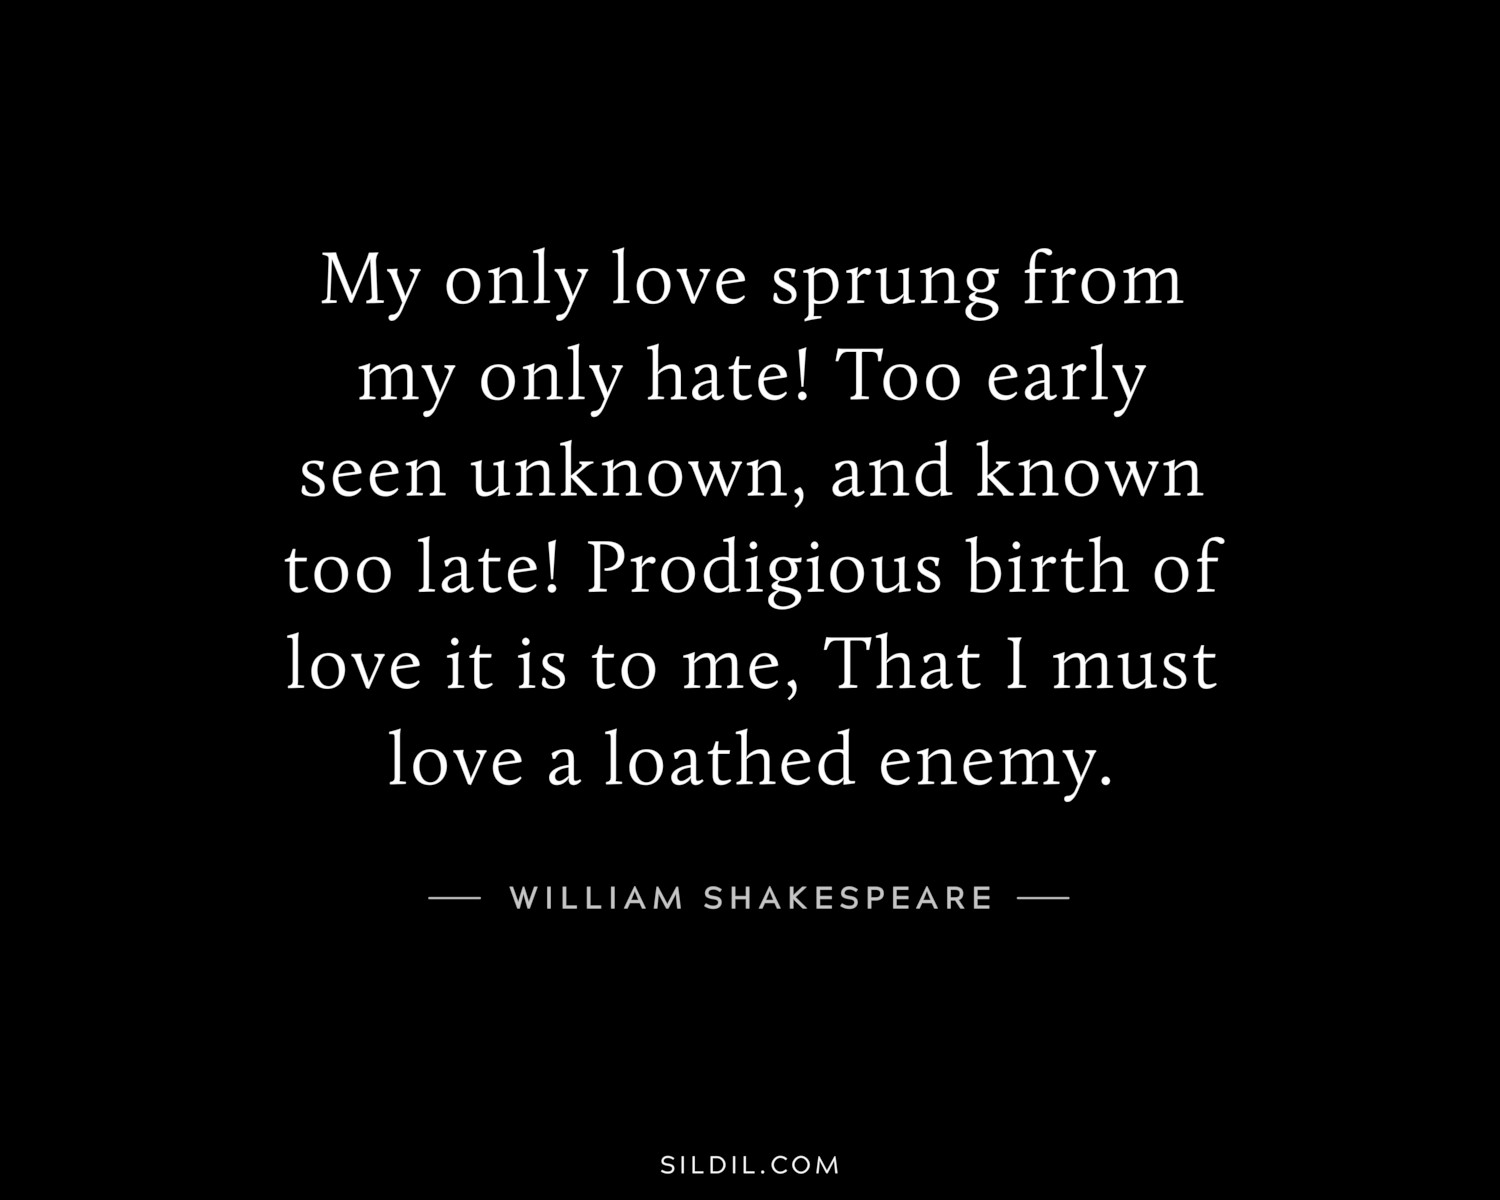 My only love sprung from my only hate! Too early seen unknown, and known too late! Prodigious birth of love it is to me, That I must love a loathed enemy.